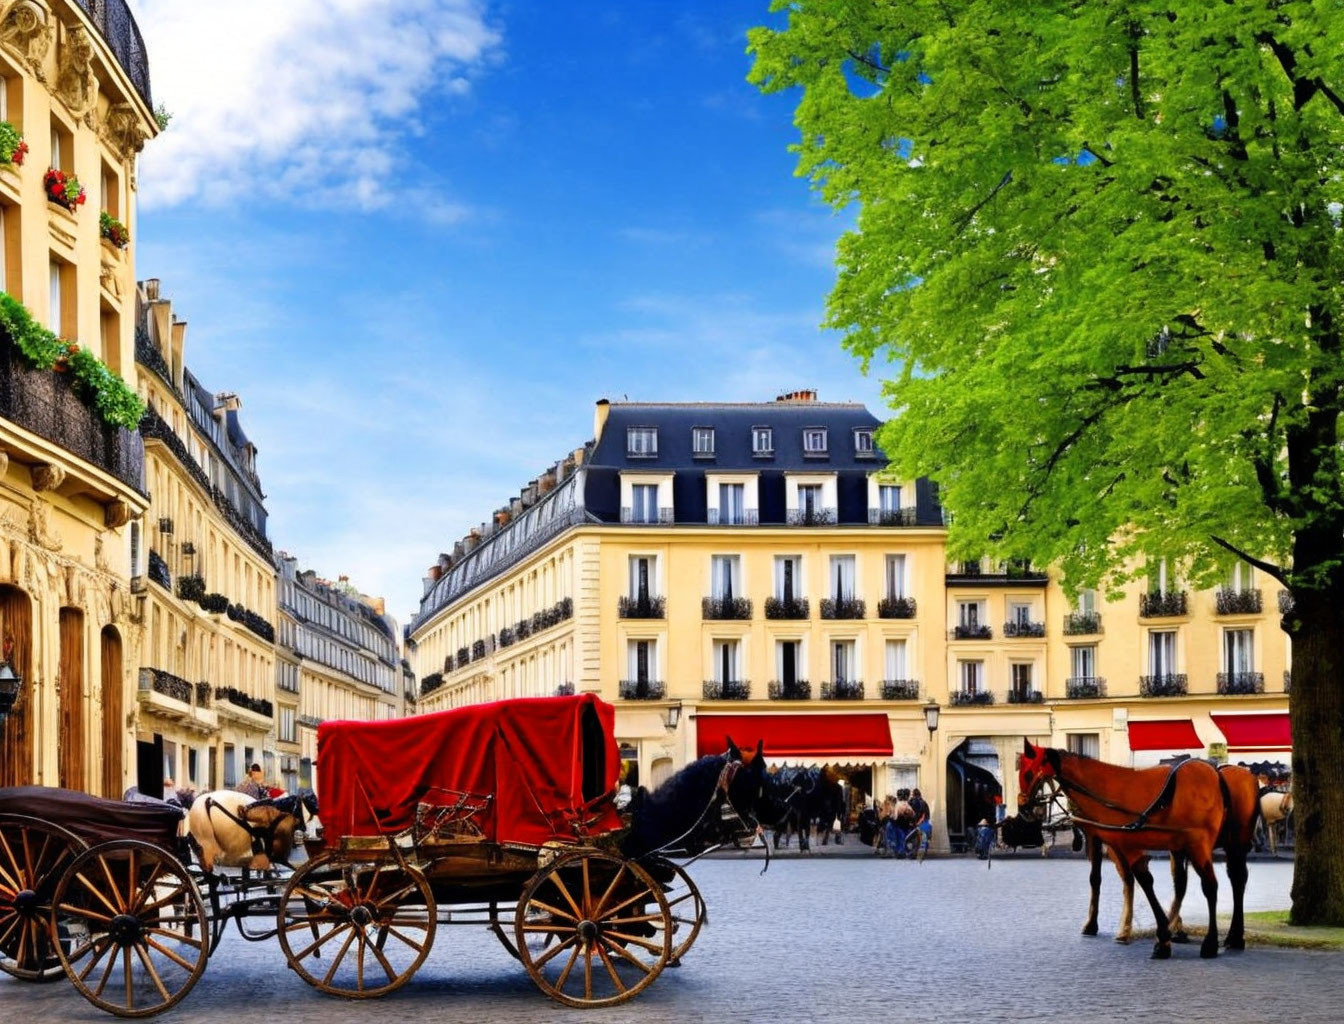 Historic horse-drawn carriages on cobbled street with European buildings